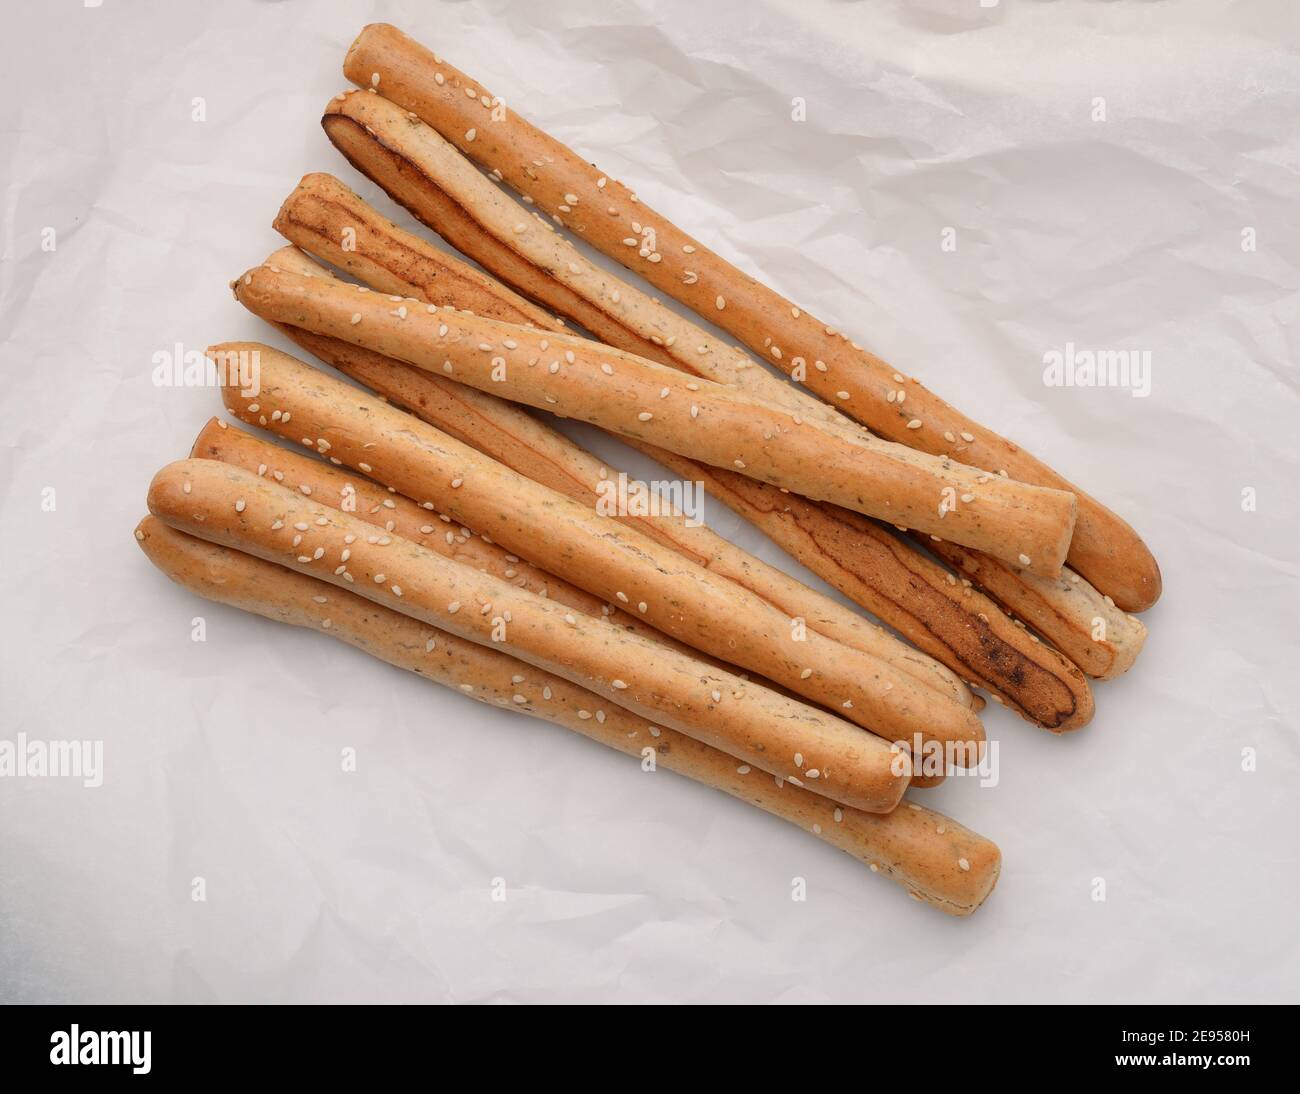 Top view of italian grissini breadsticks on baking paper Stock Photo - Alamy